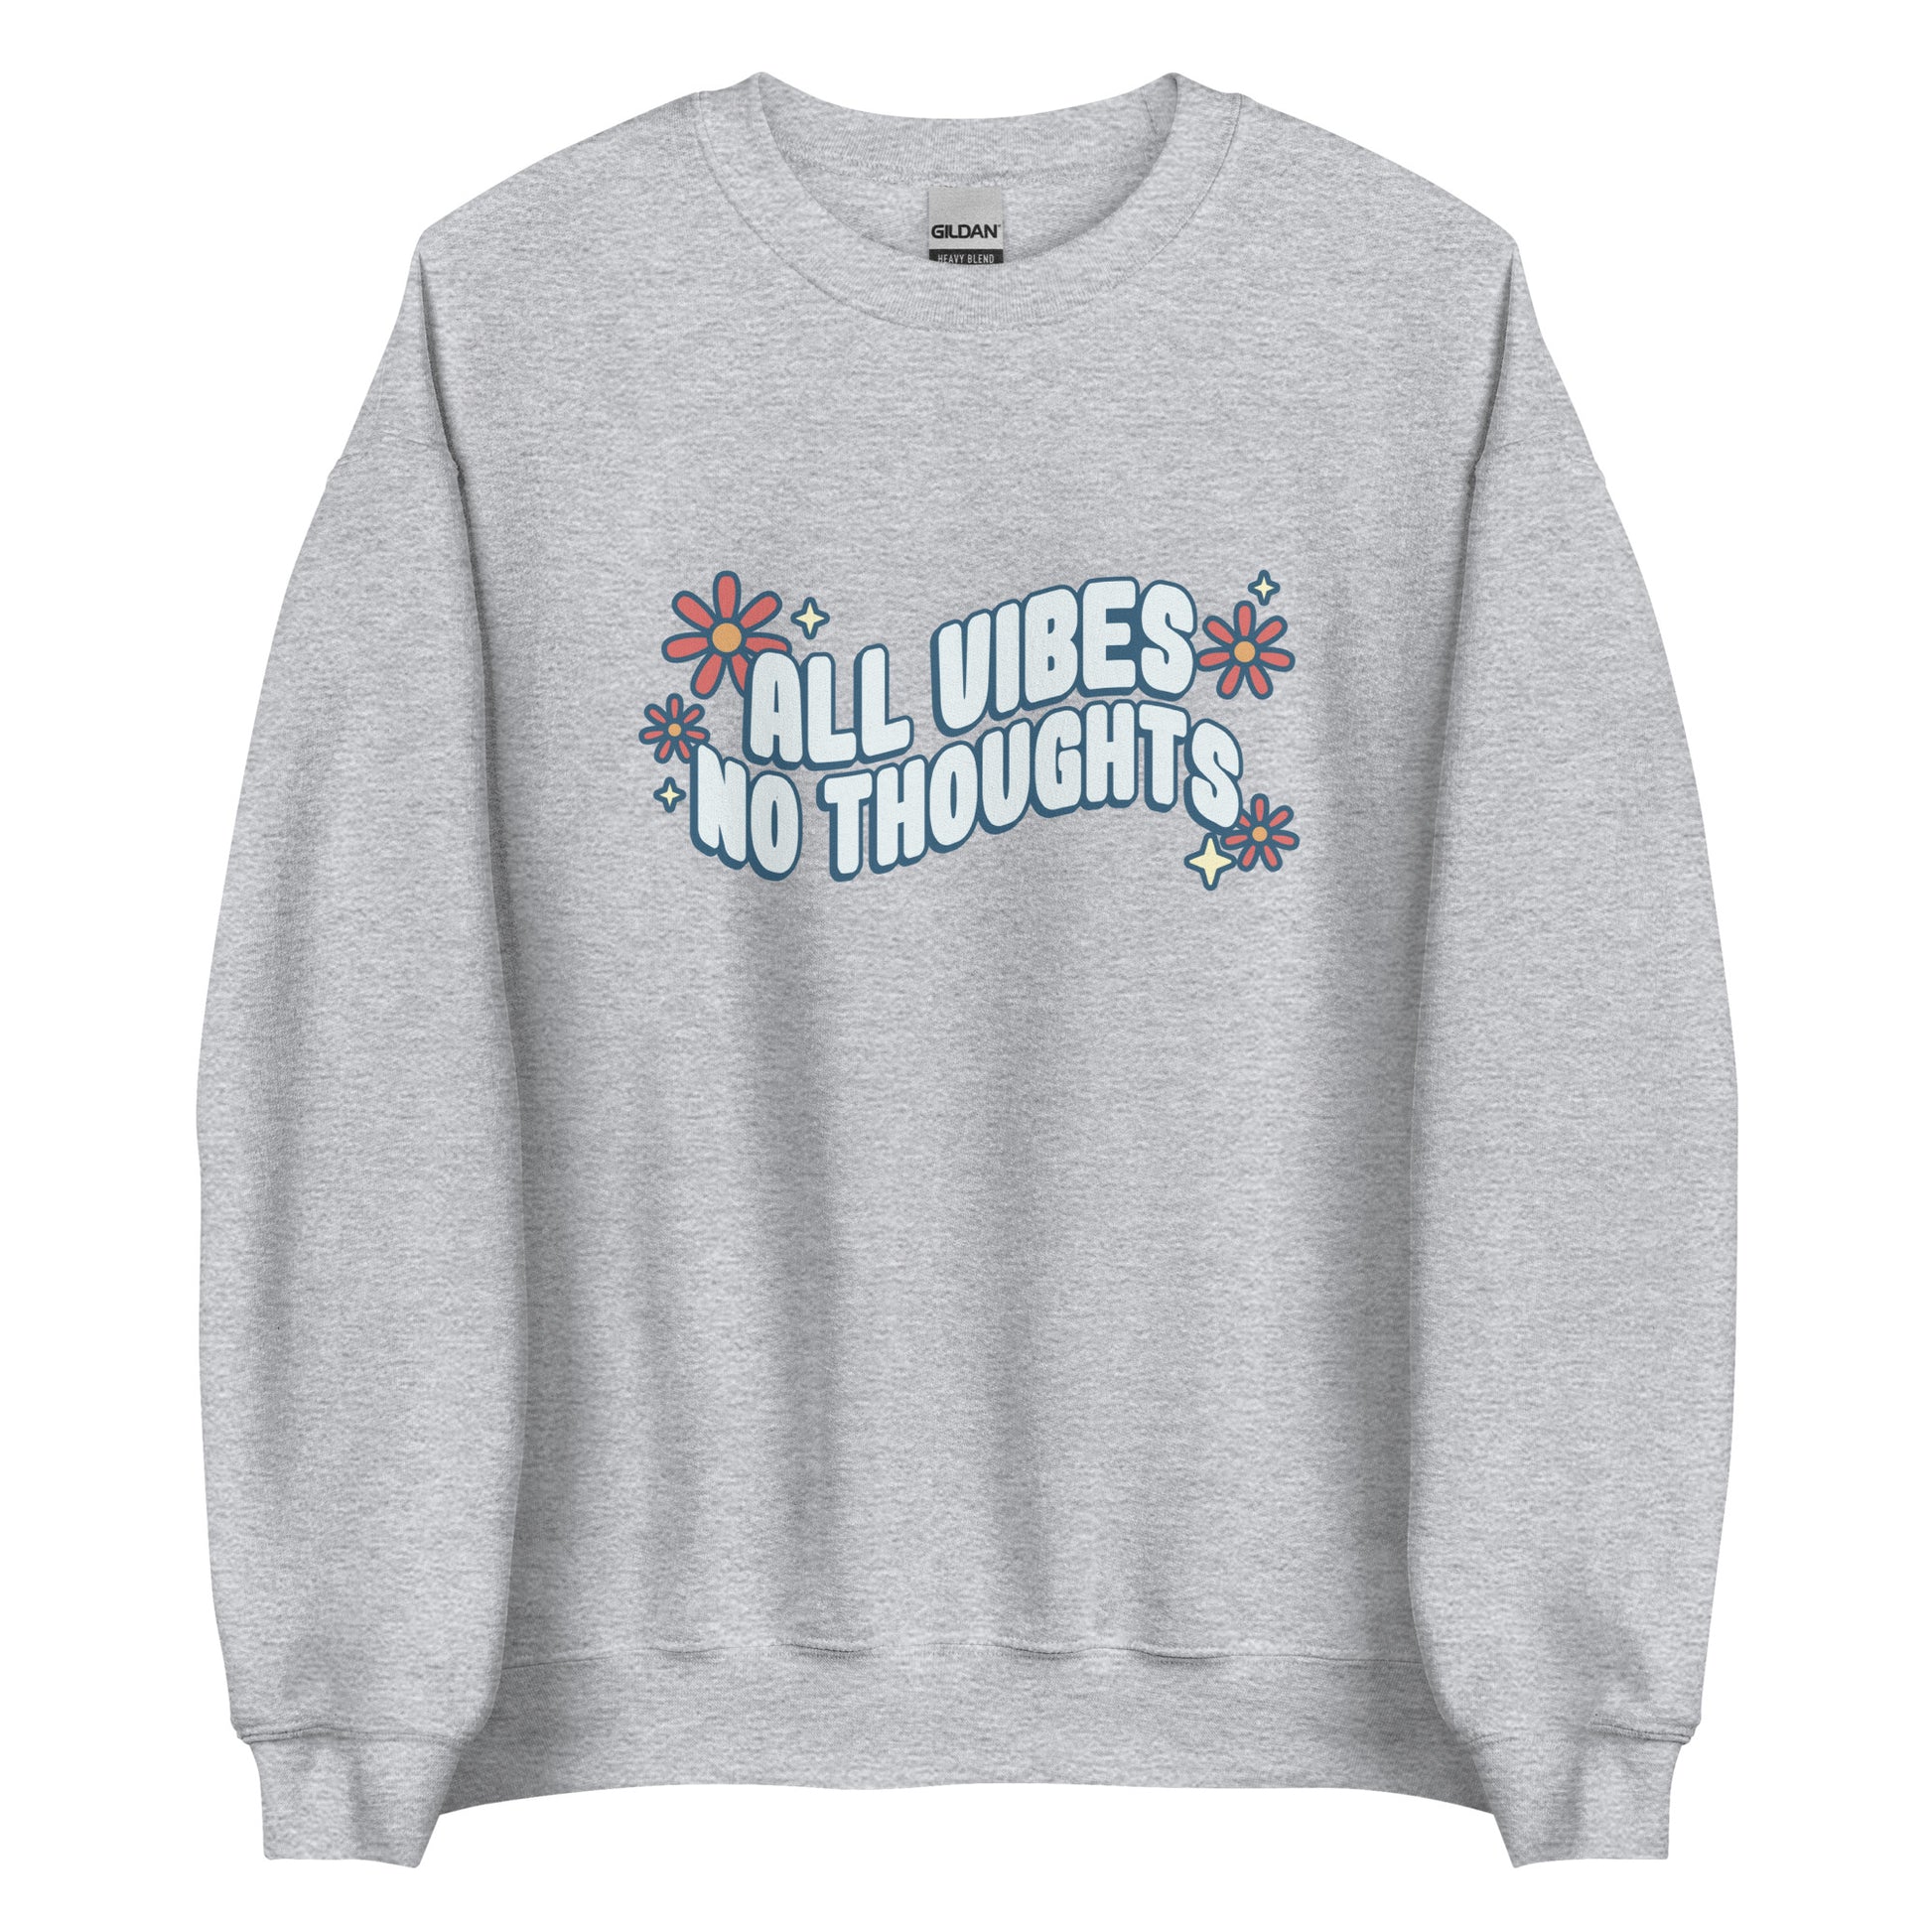 A light grey crewneck sweatshirt featuring text that reads "All vibes, no thoughts". Around the text are a few pink flowers and pale yellow sparkles.